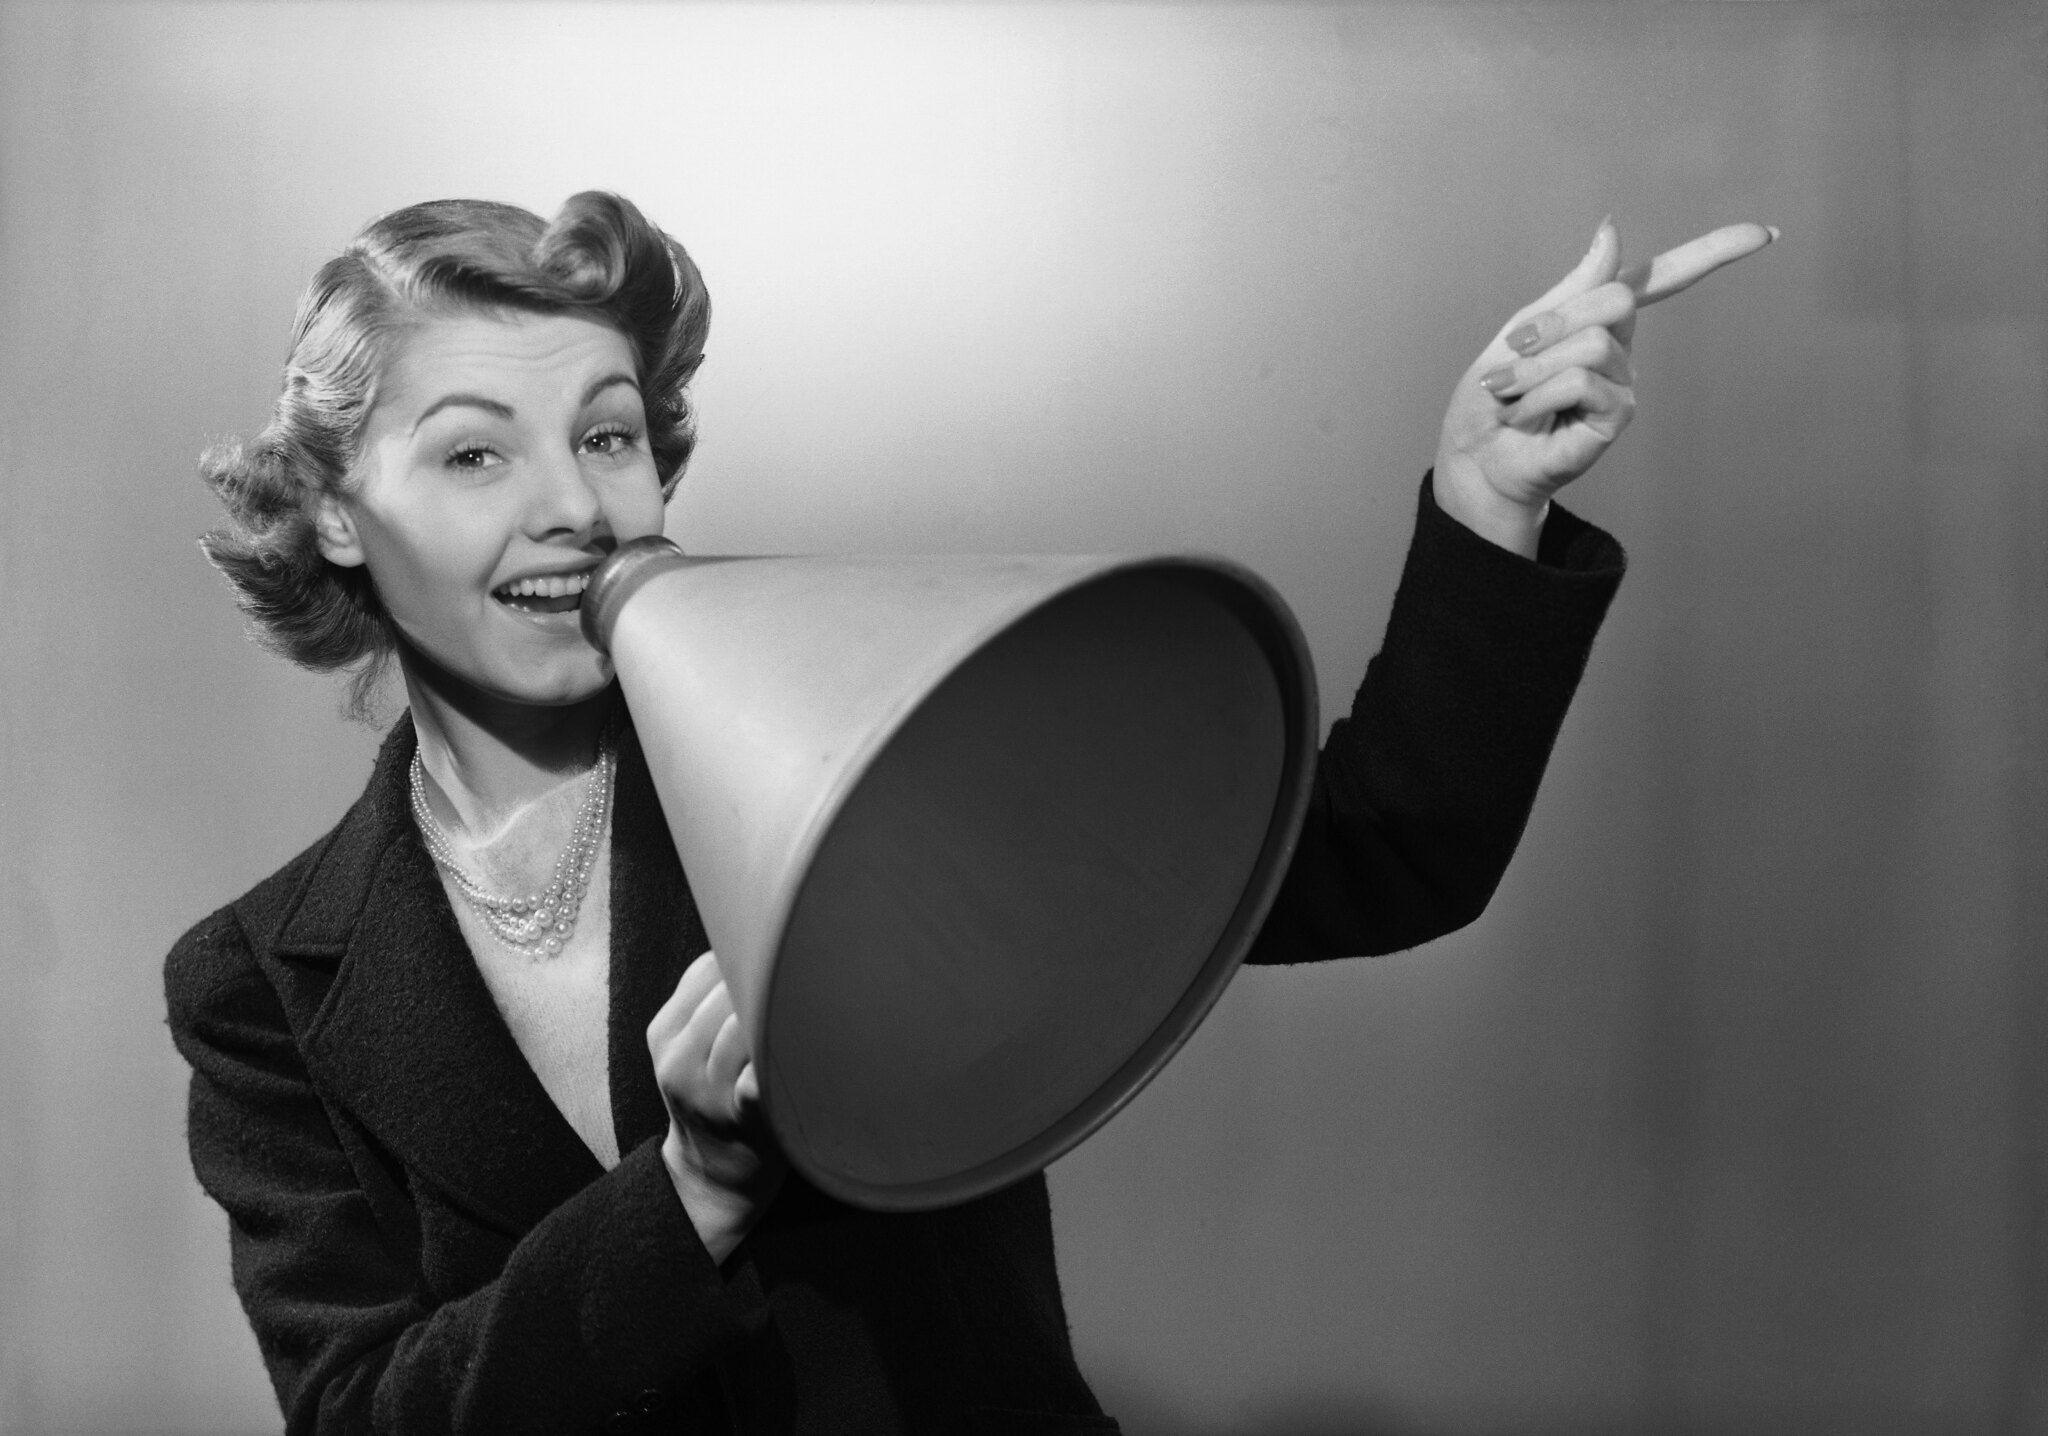 A happy woman, holding a megaphone, making an announcement.